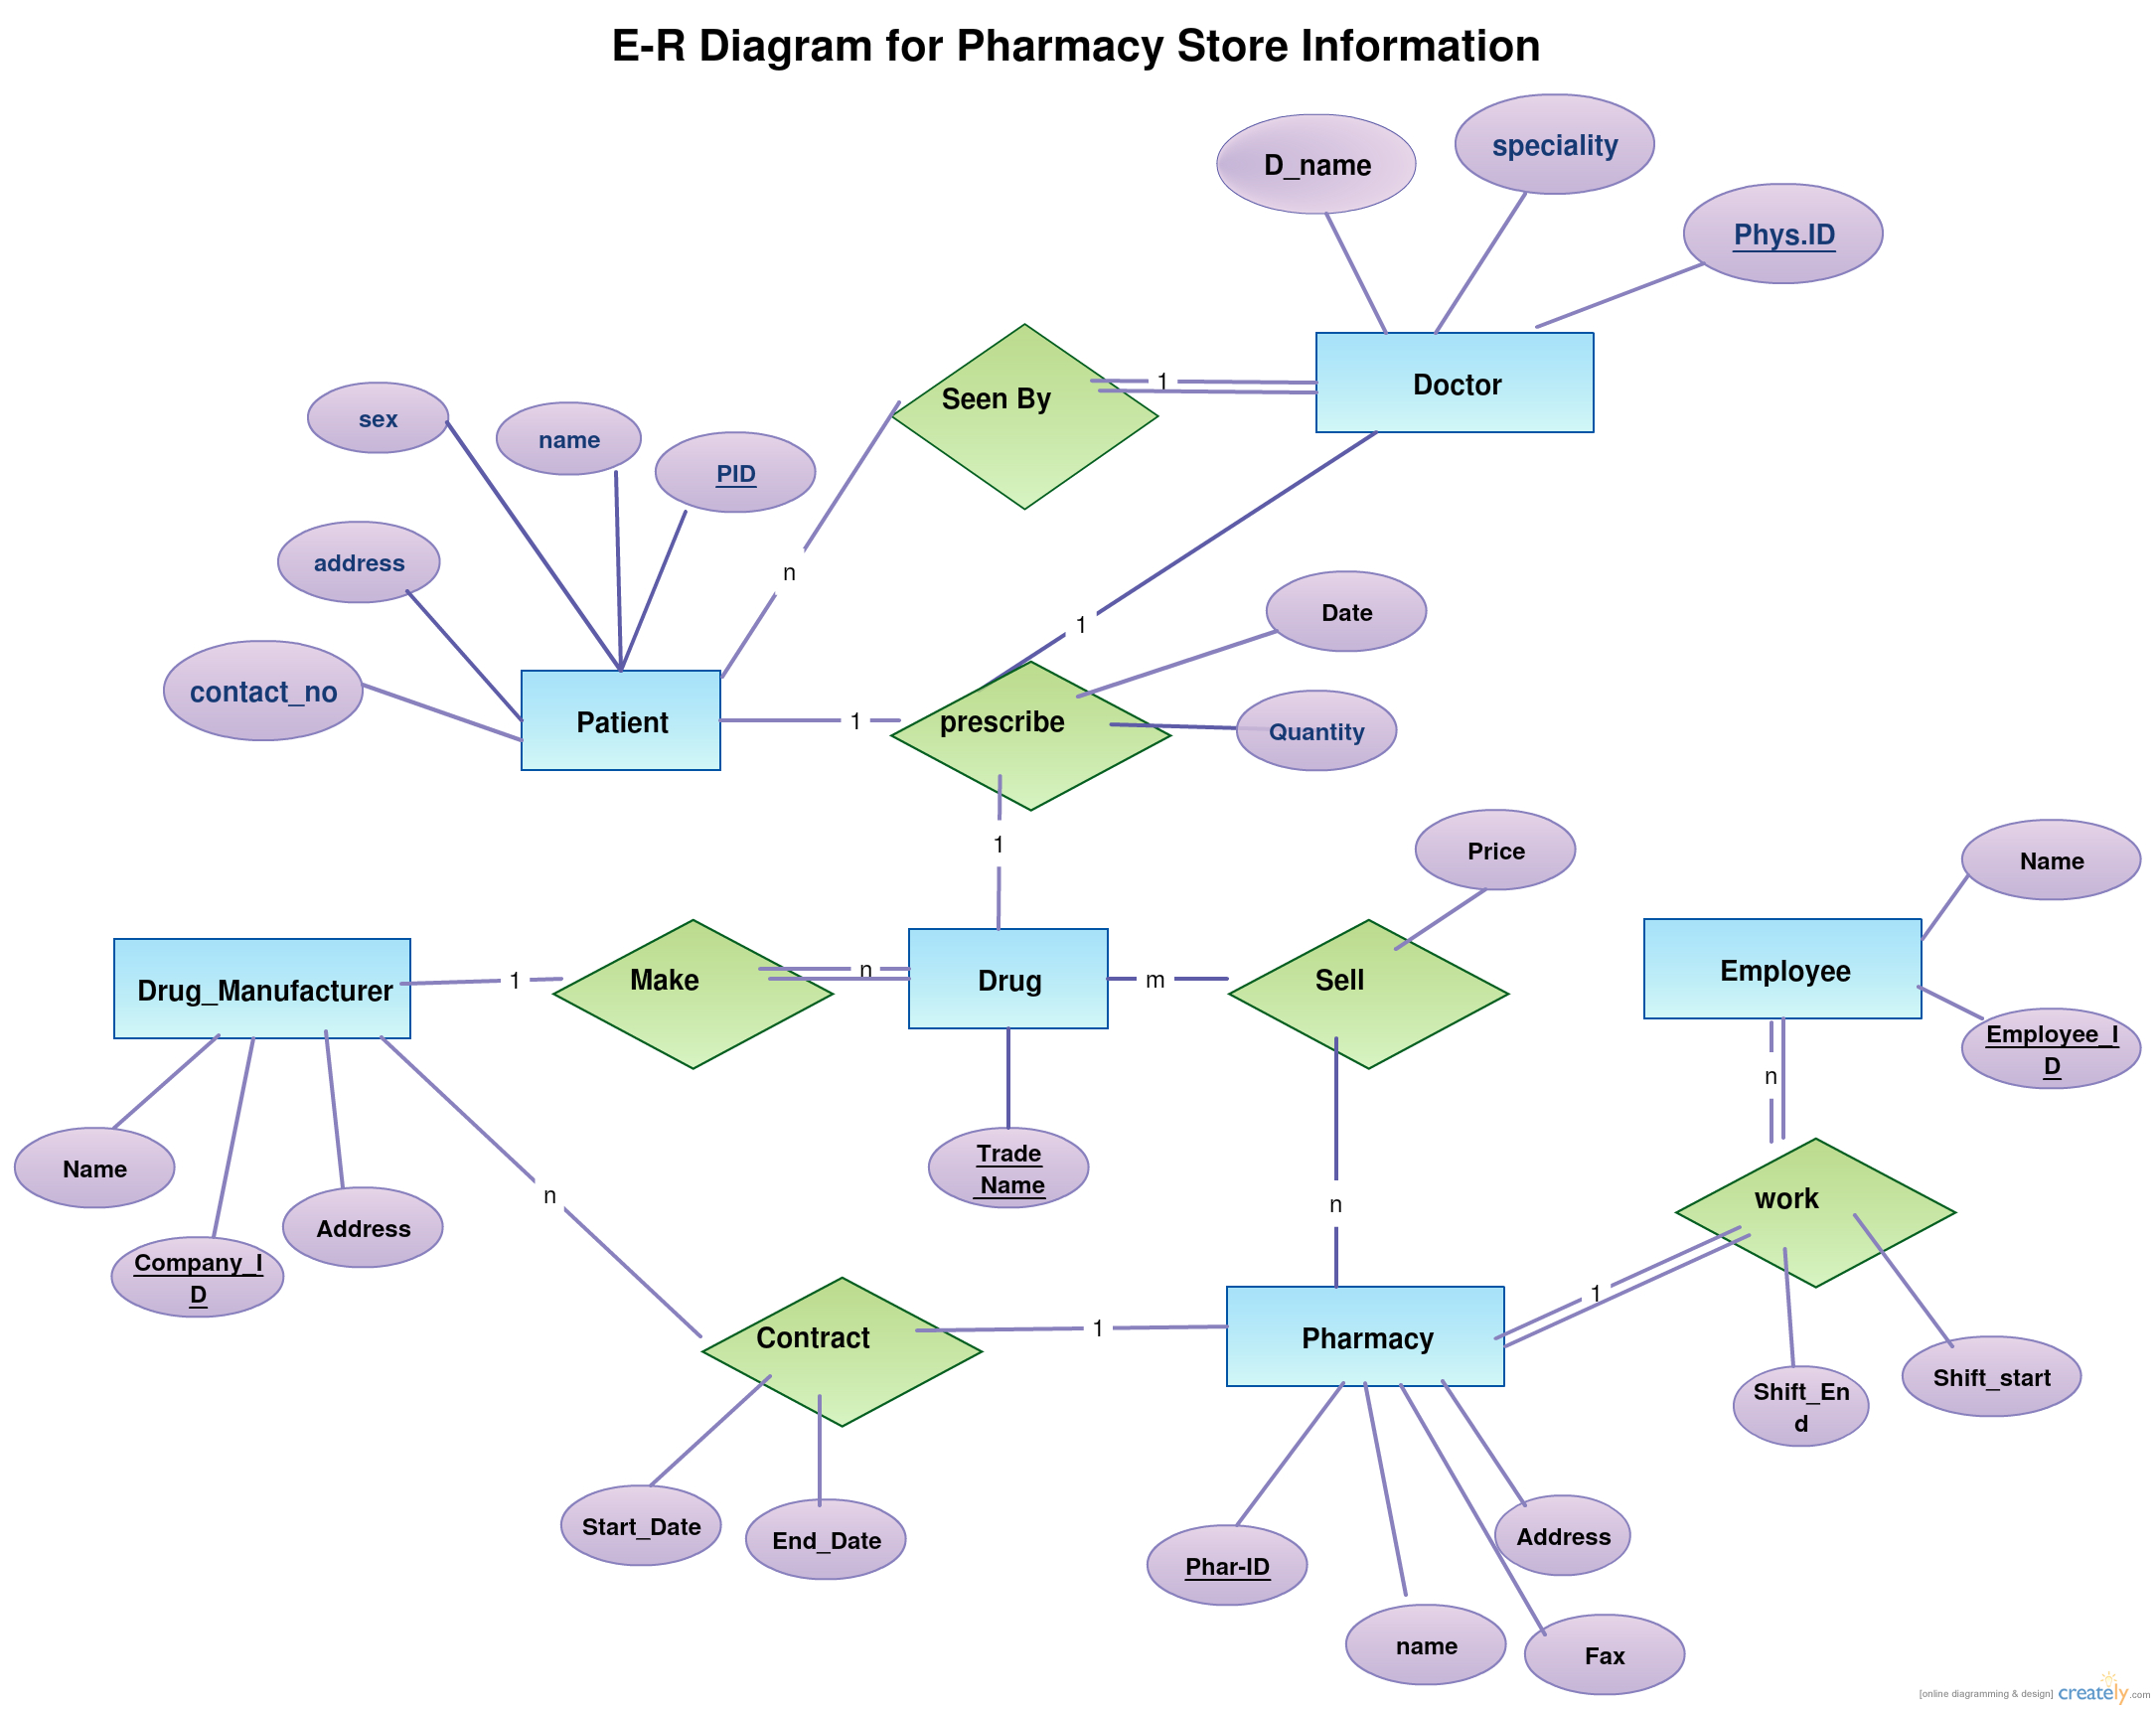 An Er Diagram Of Pharmacy. This Er Diagram Is Created And Shared regarding Entity Relationship Diagram Examples Pdf